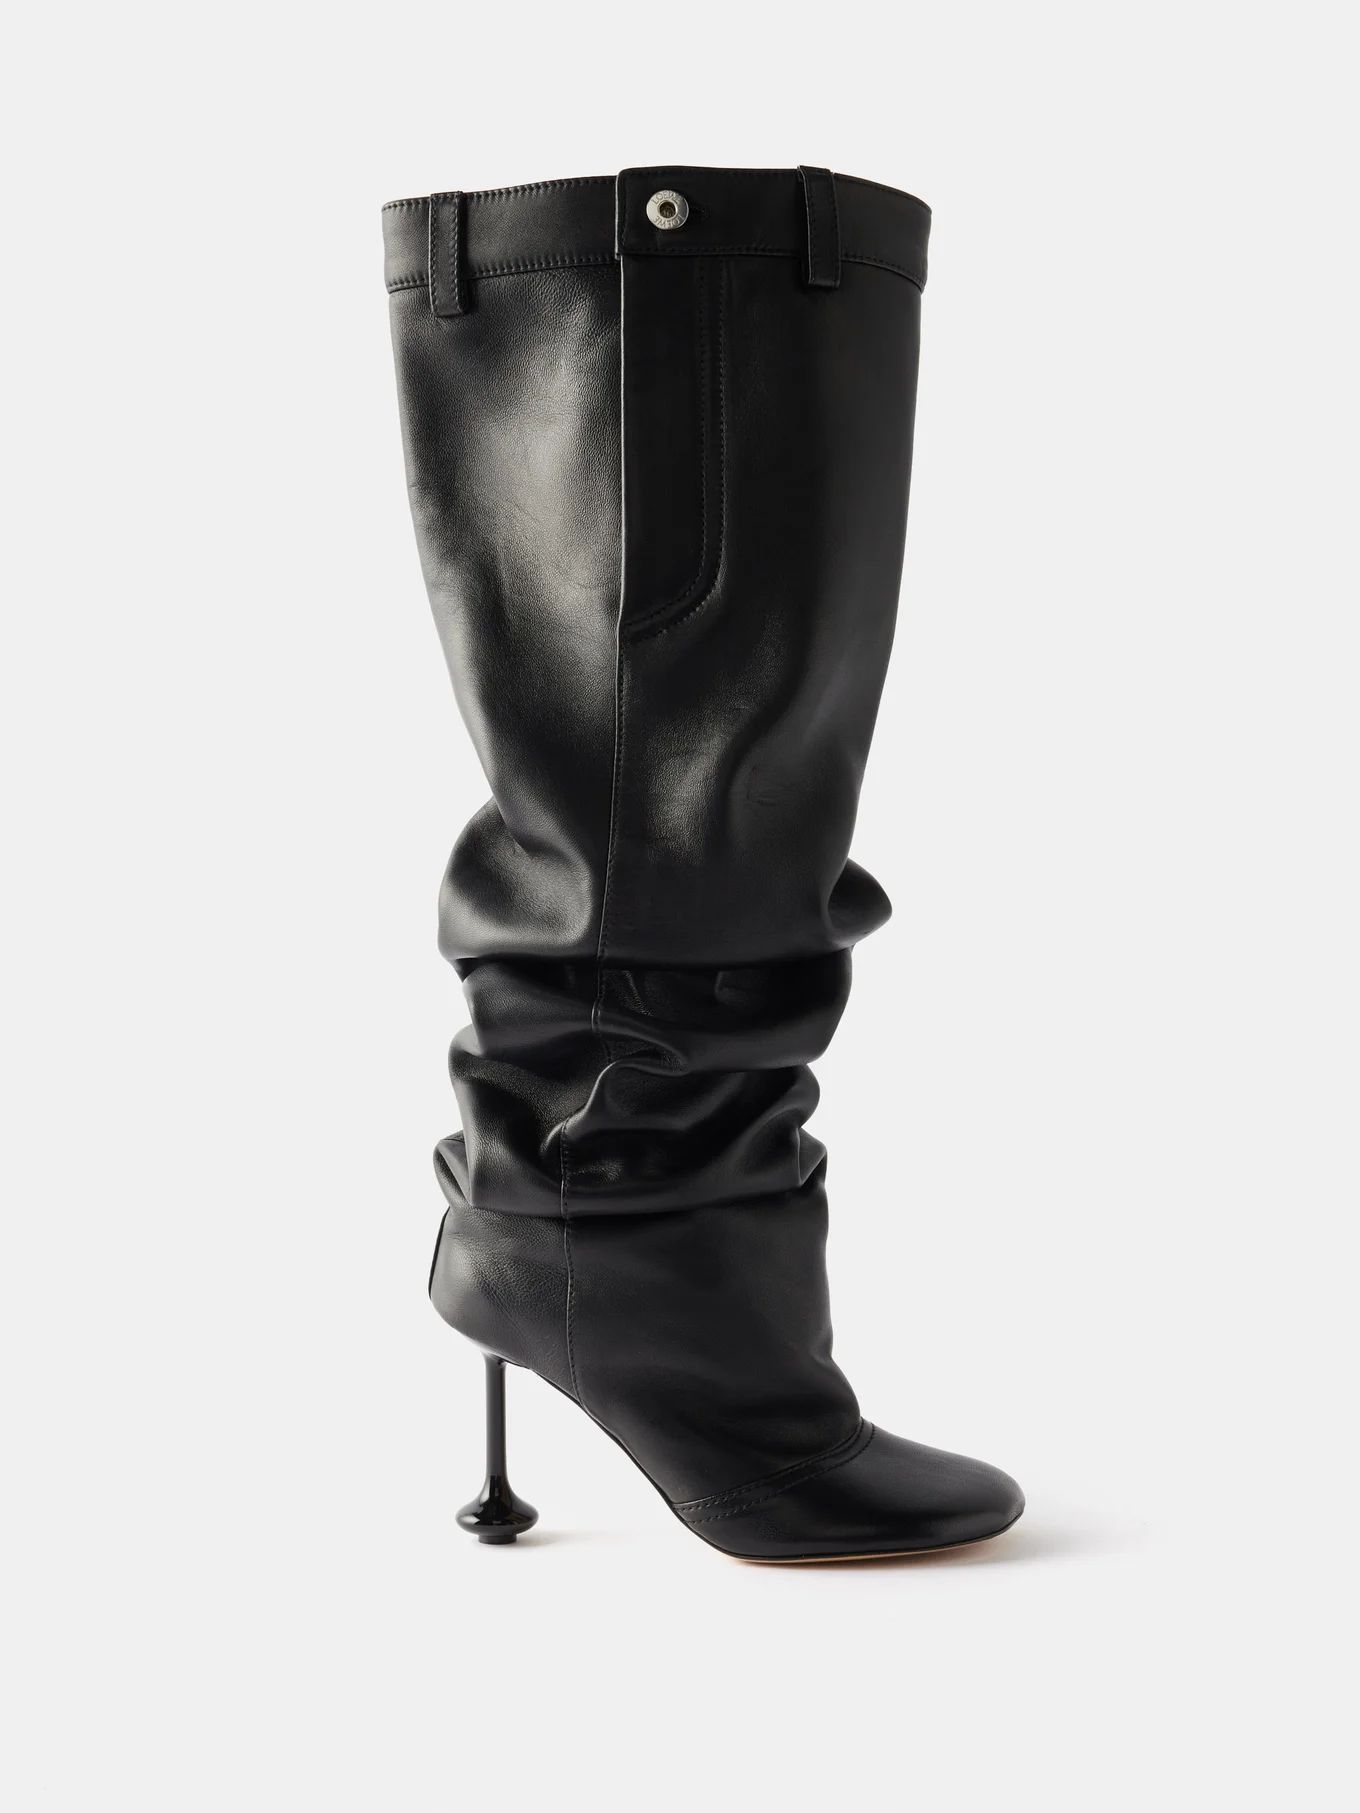 Toy Panta 90 over-the-knee boots | Matches (US)